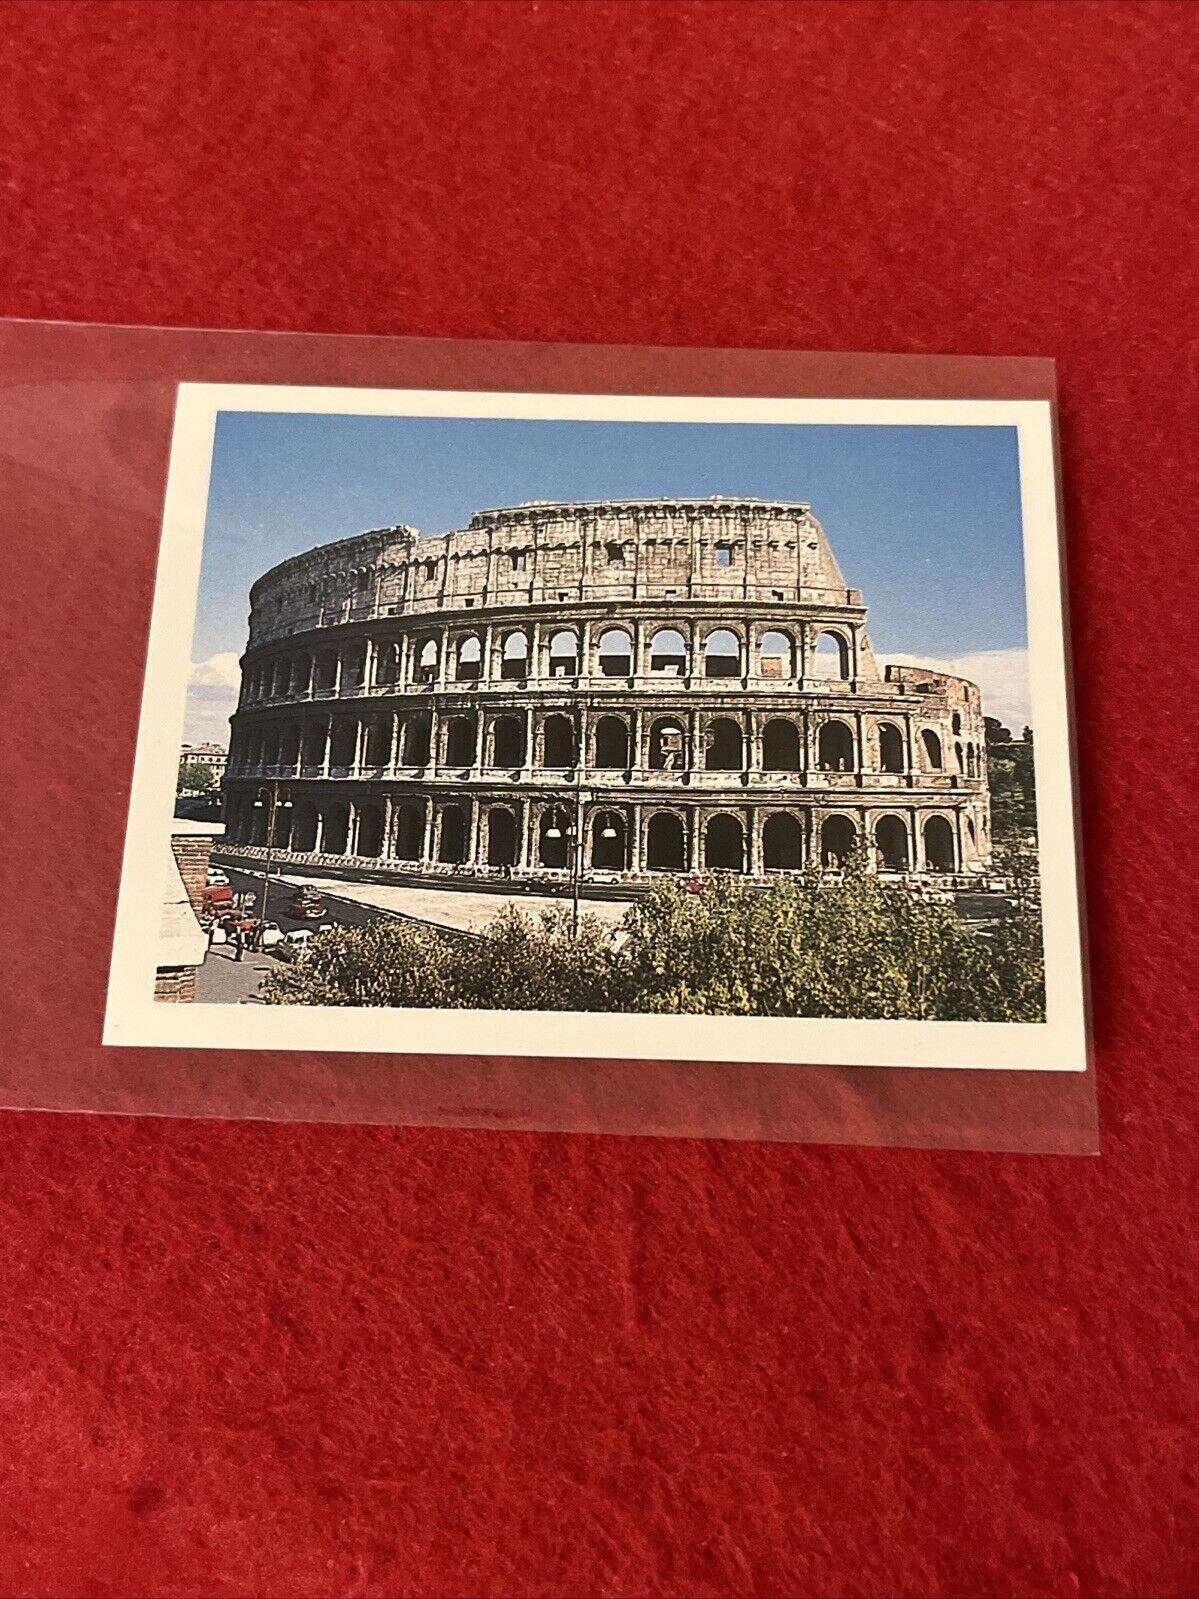 1984 Player’s Tom Thumb “Wonders Of The Ancient World” COLOSSEUM Card #14  NM-MT